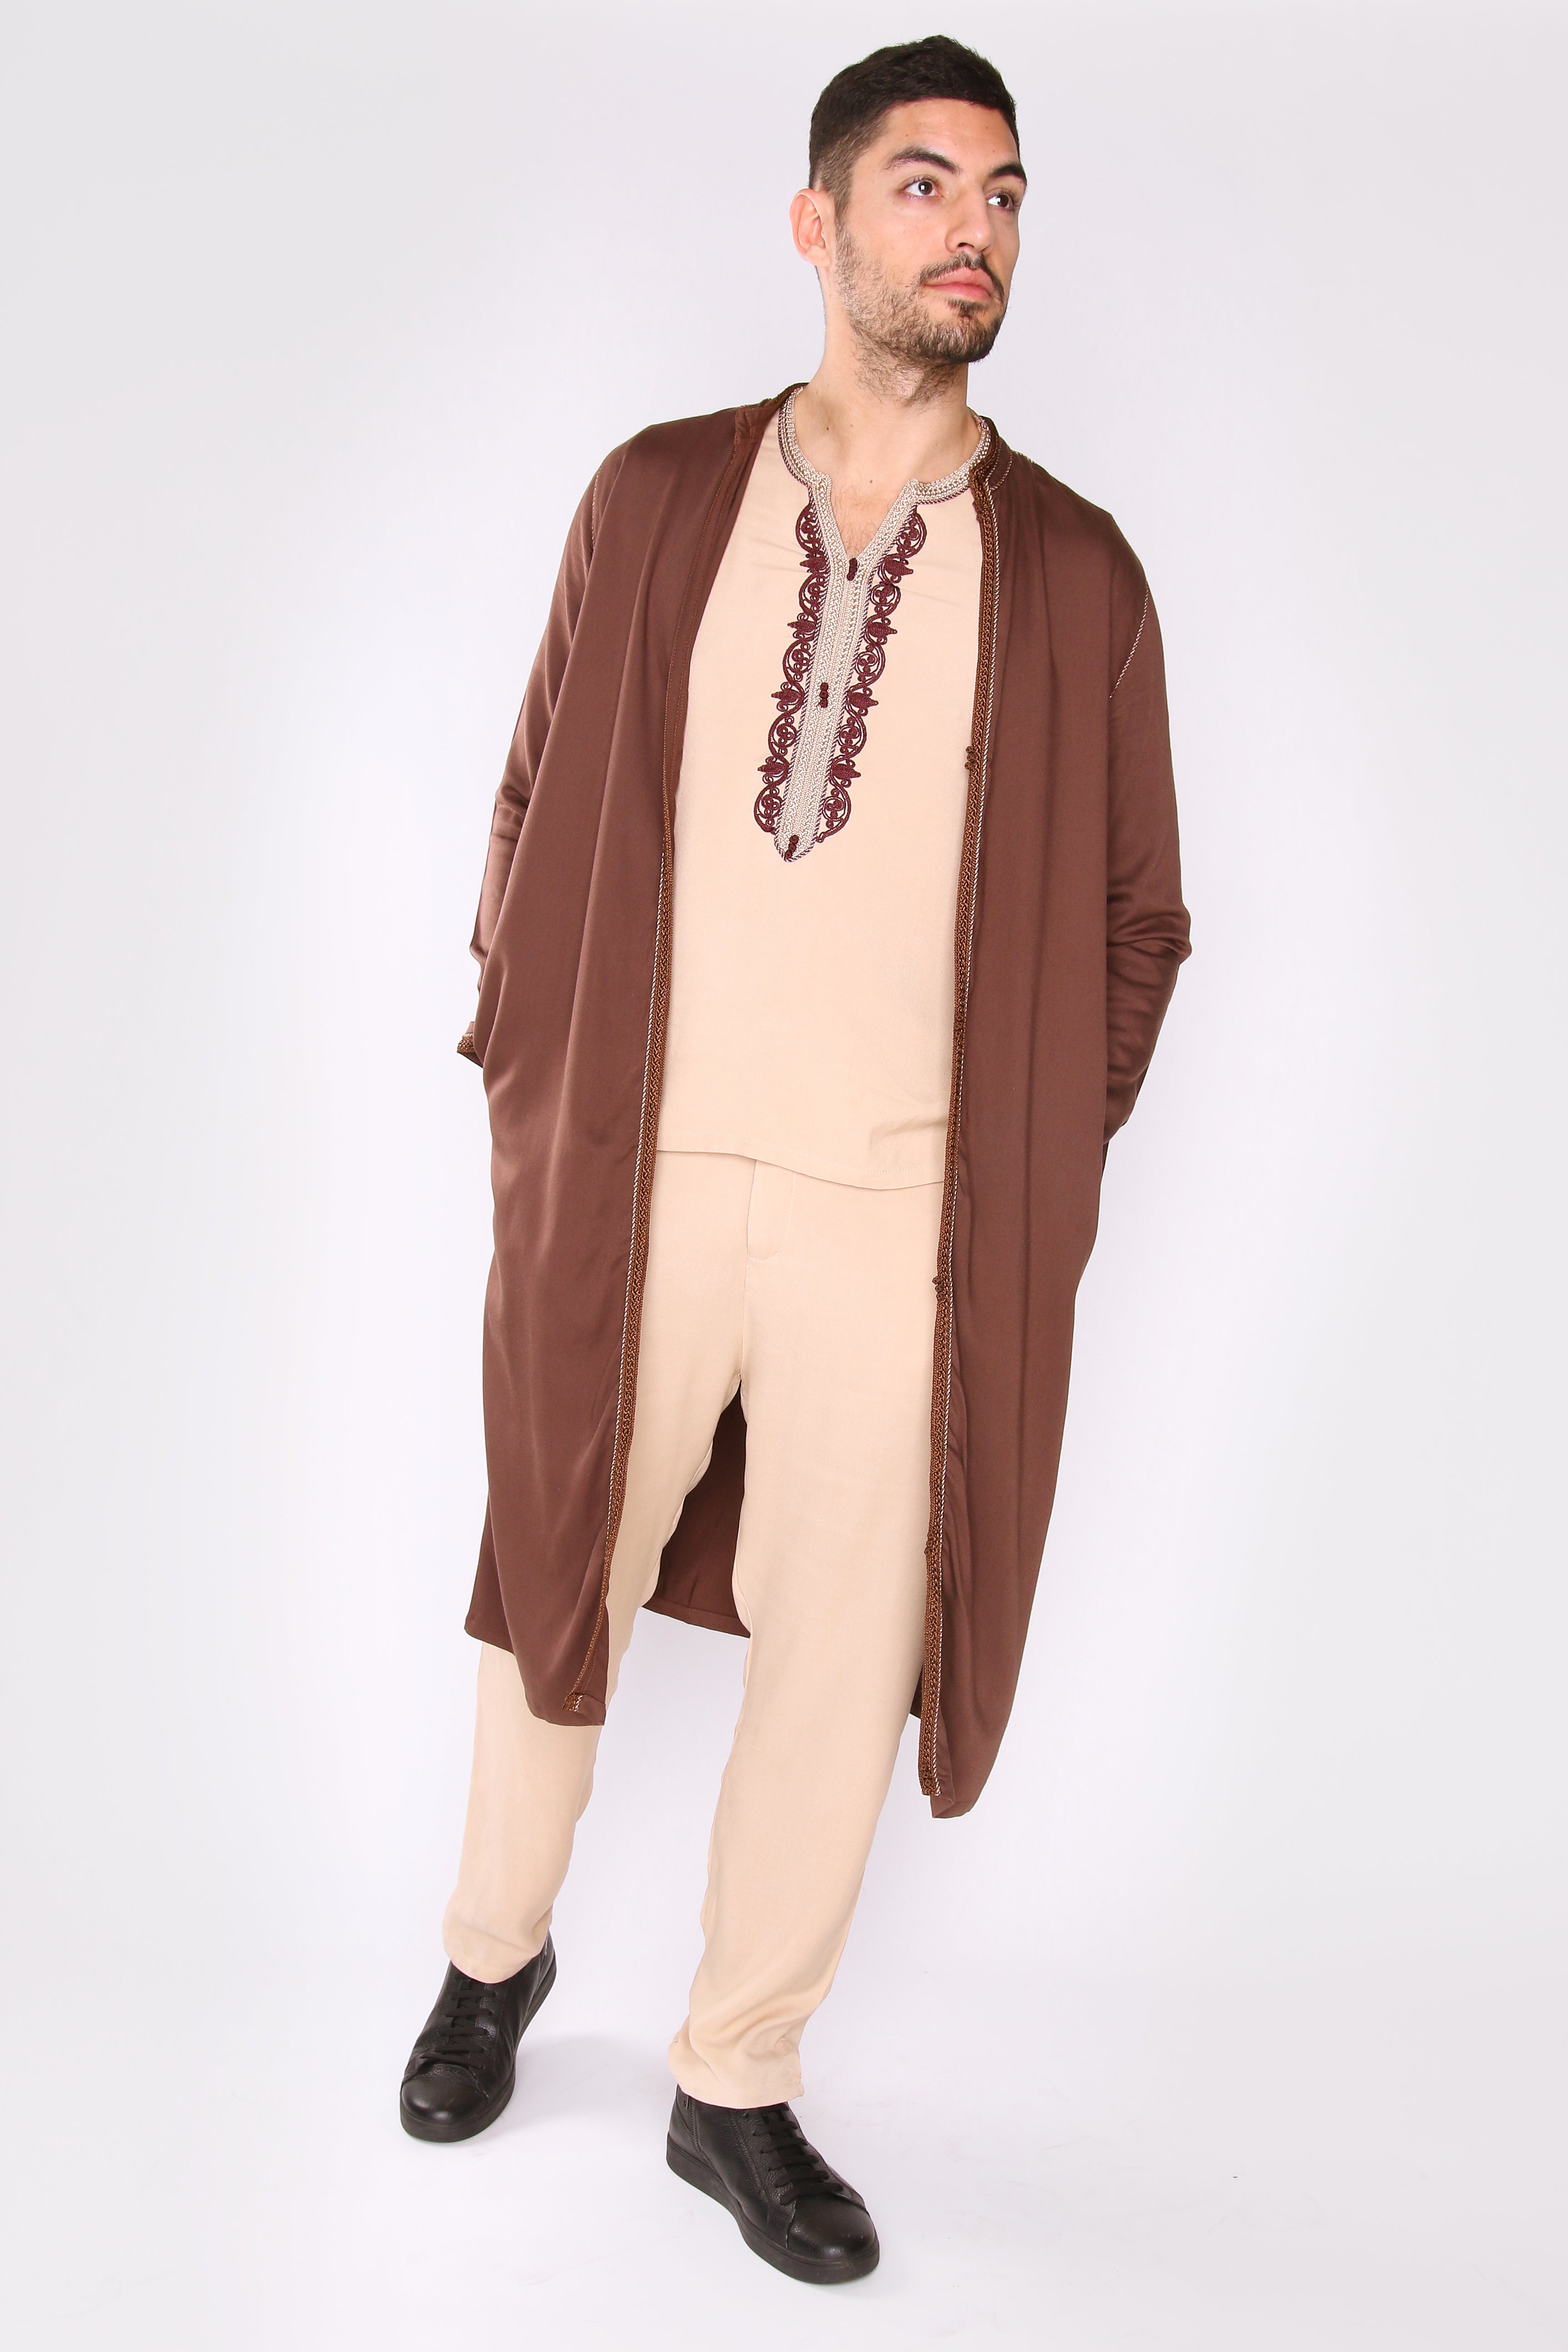 Jabador Assem Men's Tunic Top Longline Jacket and Trousers Embroidered Co-Ord Set in Brown